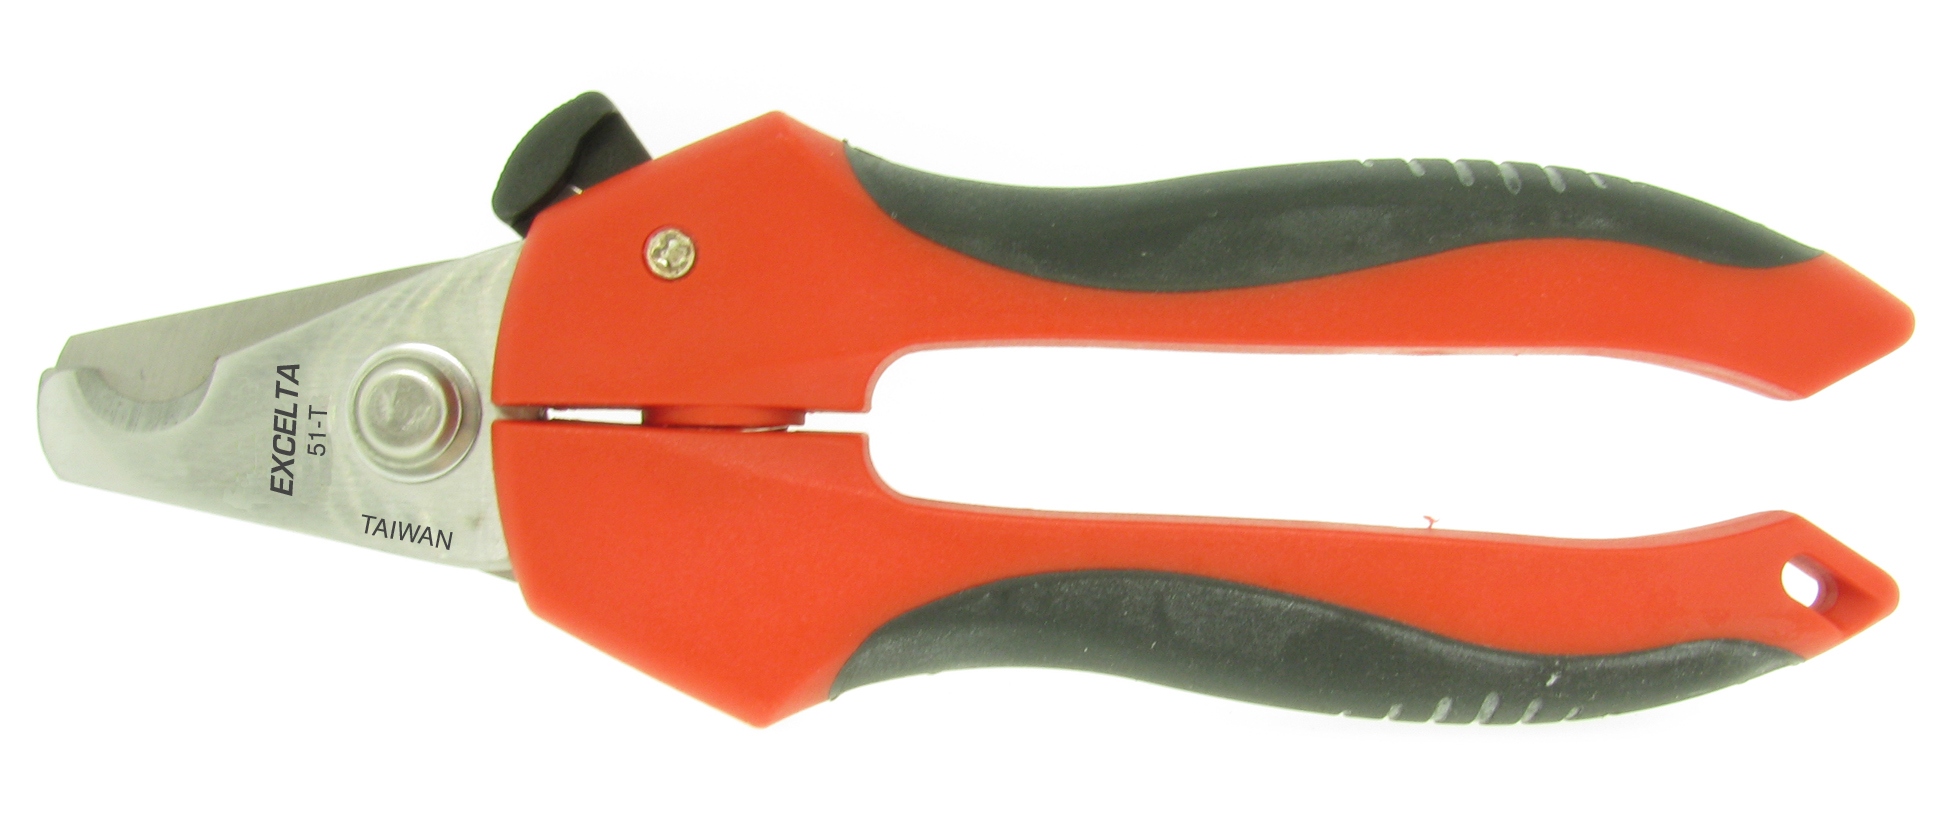 Excelta 51-T 6.5 Inch Tubing Cutter